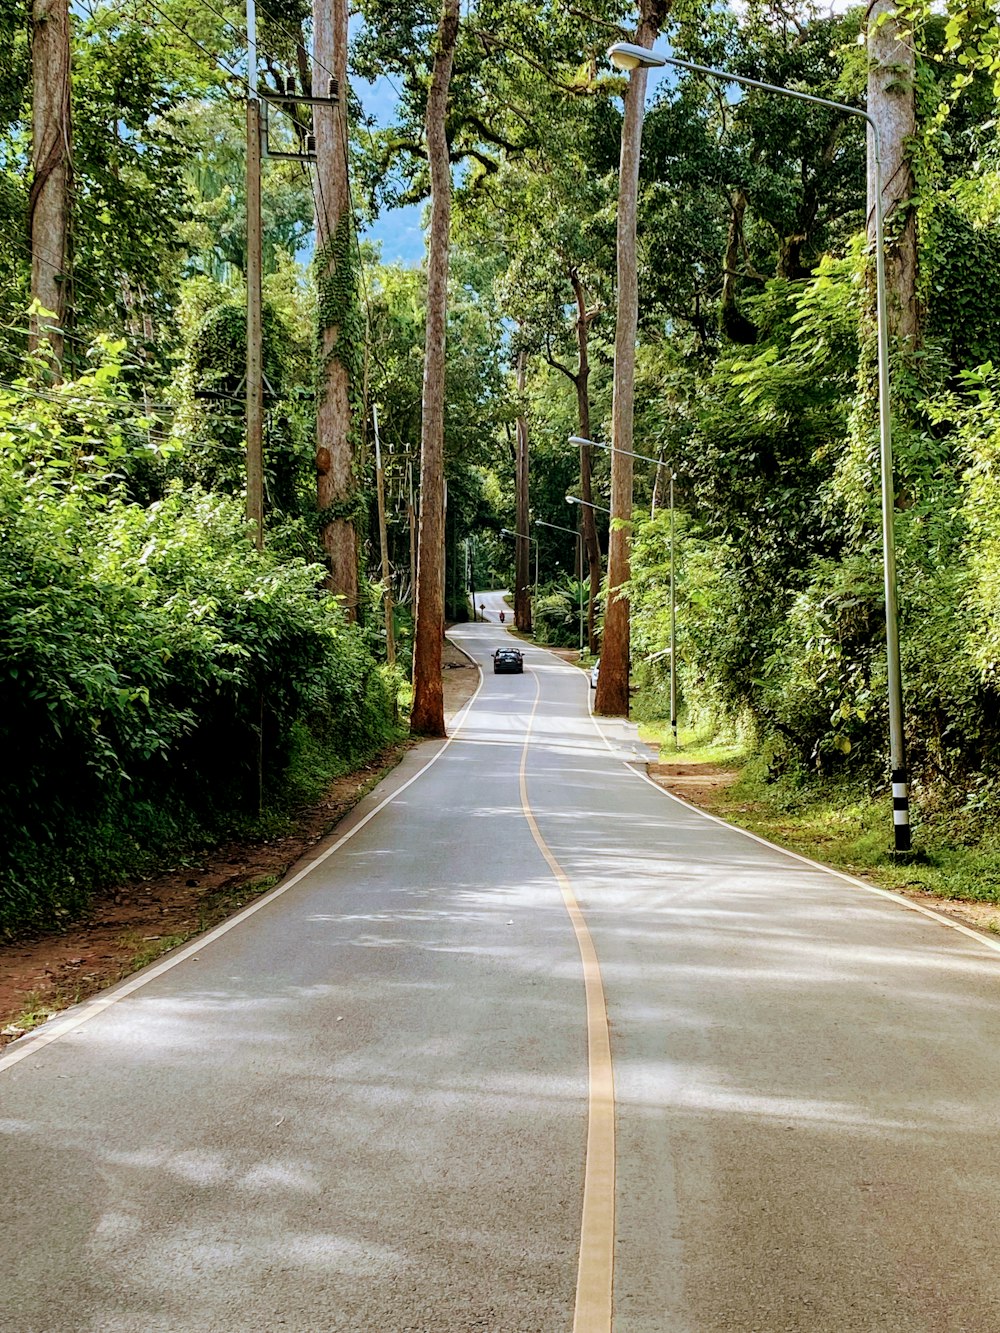 a car driving down a tree lined road